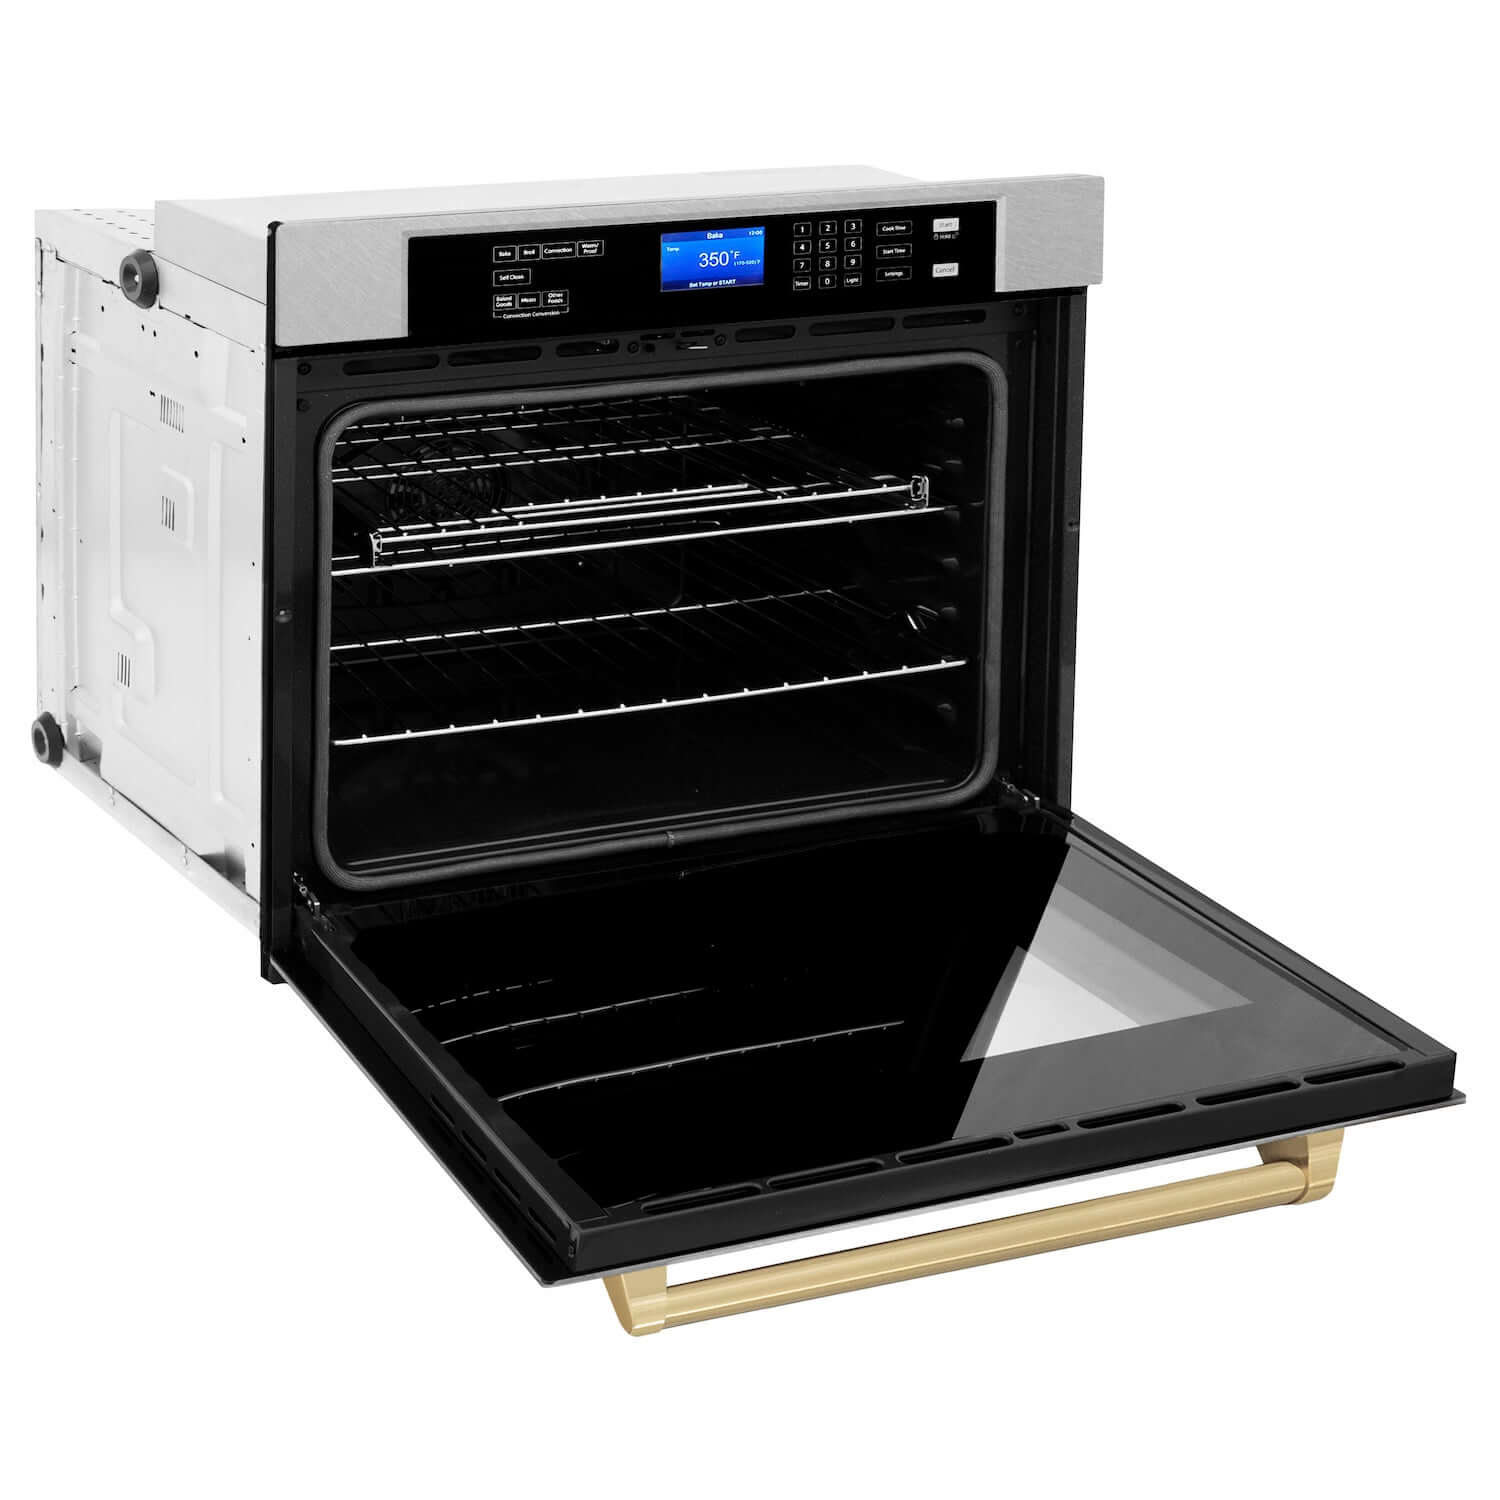 ZLINE Autograph Edition 30 in. Electric Single Wall Oven with Self Clean and True Convection in Fingerprint Resistant Stainless Steel and Champagne Bronze Accents (AWSSZ-30-CB)